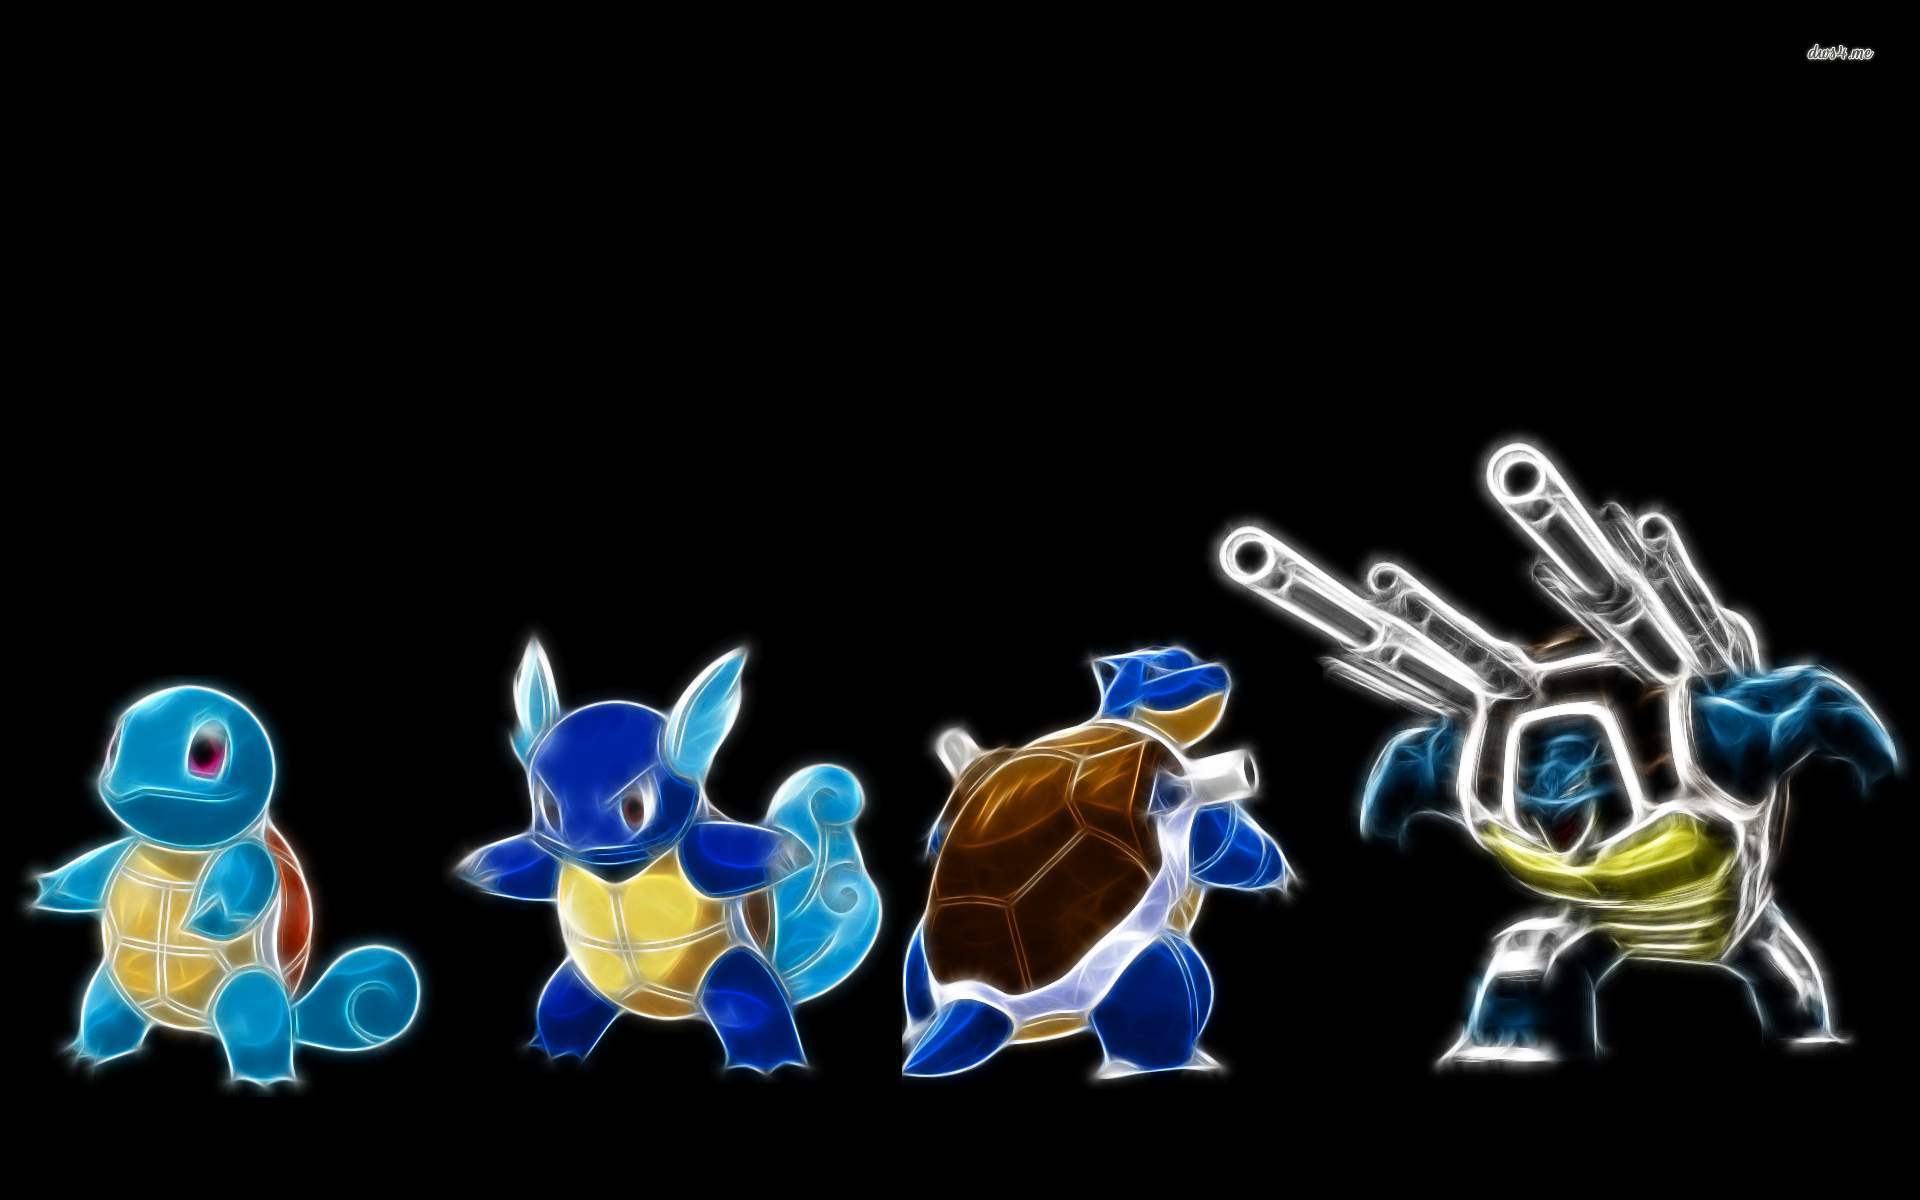 Blastoise, Squirtle, Wartortle and Master wallpaper - Anime ...